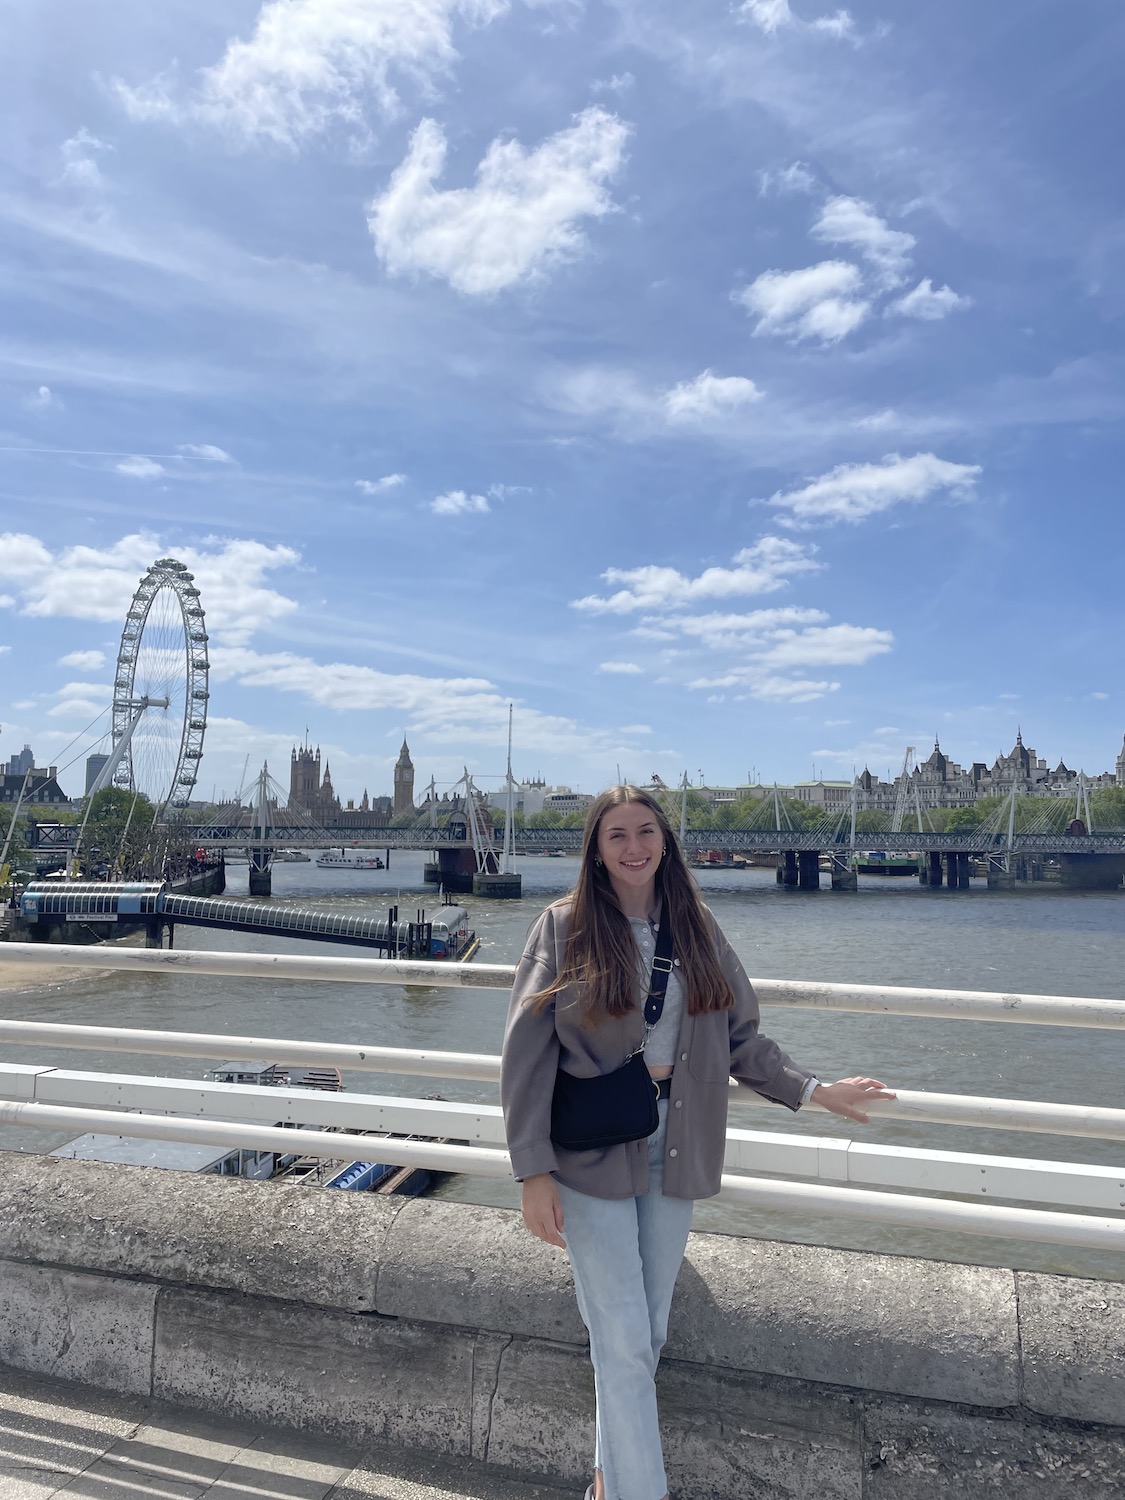 Marietta College student Kaylie Ward ’24 poses for a photo in front of the Westminster Bridge during her Education Abroad trip